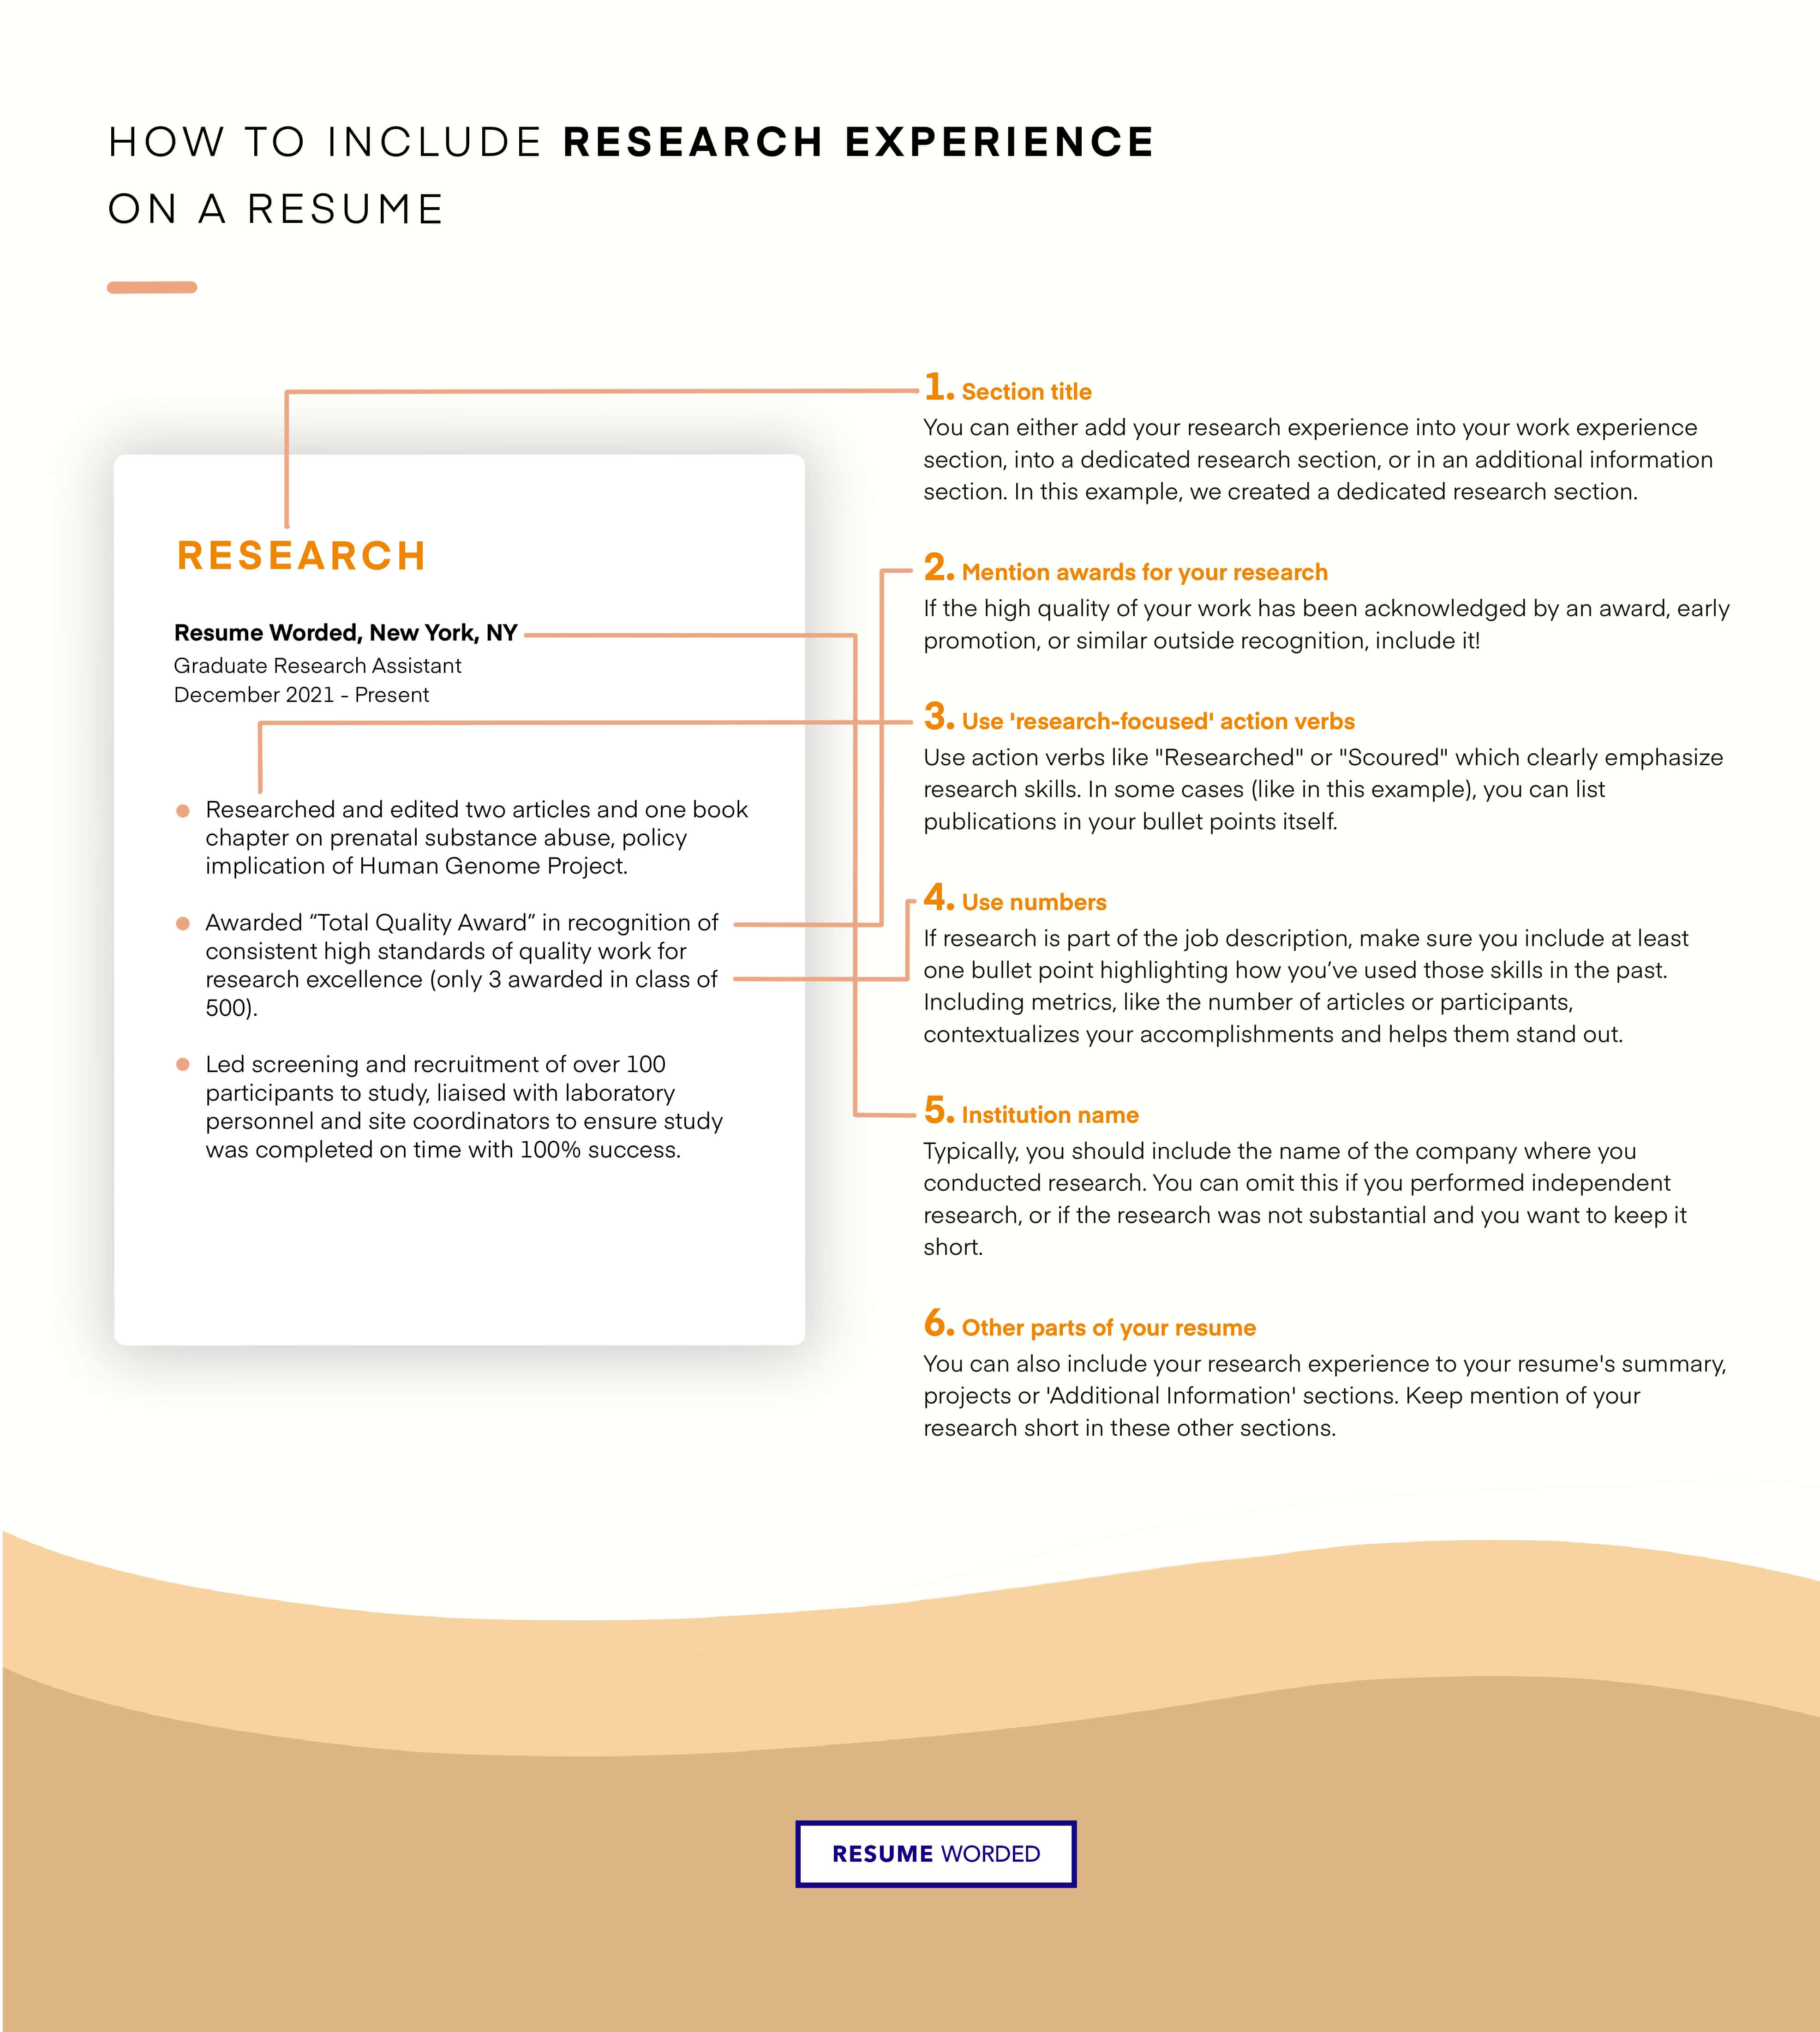 Showcase your Research Methodology Proficiency - Psychology Research Assistant CV